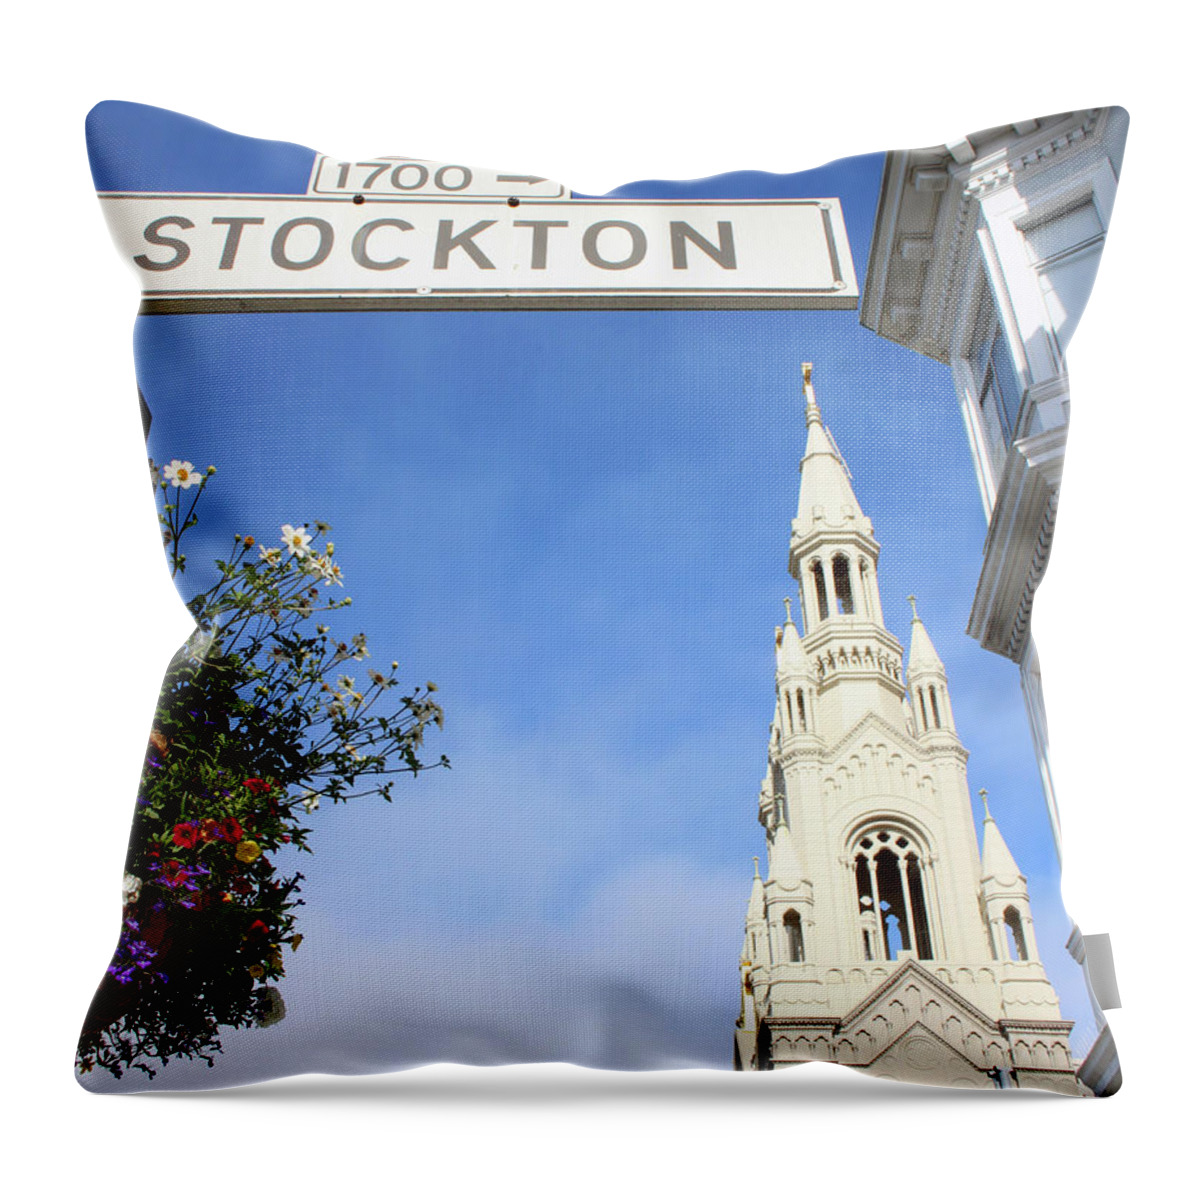 San Francisco Throw Pillow featuring the photograph Corner Of Stockton- by Linda Woods by Linda Woods